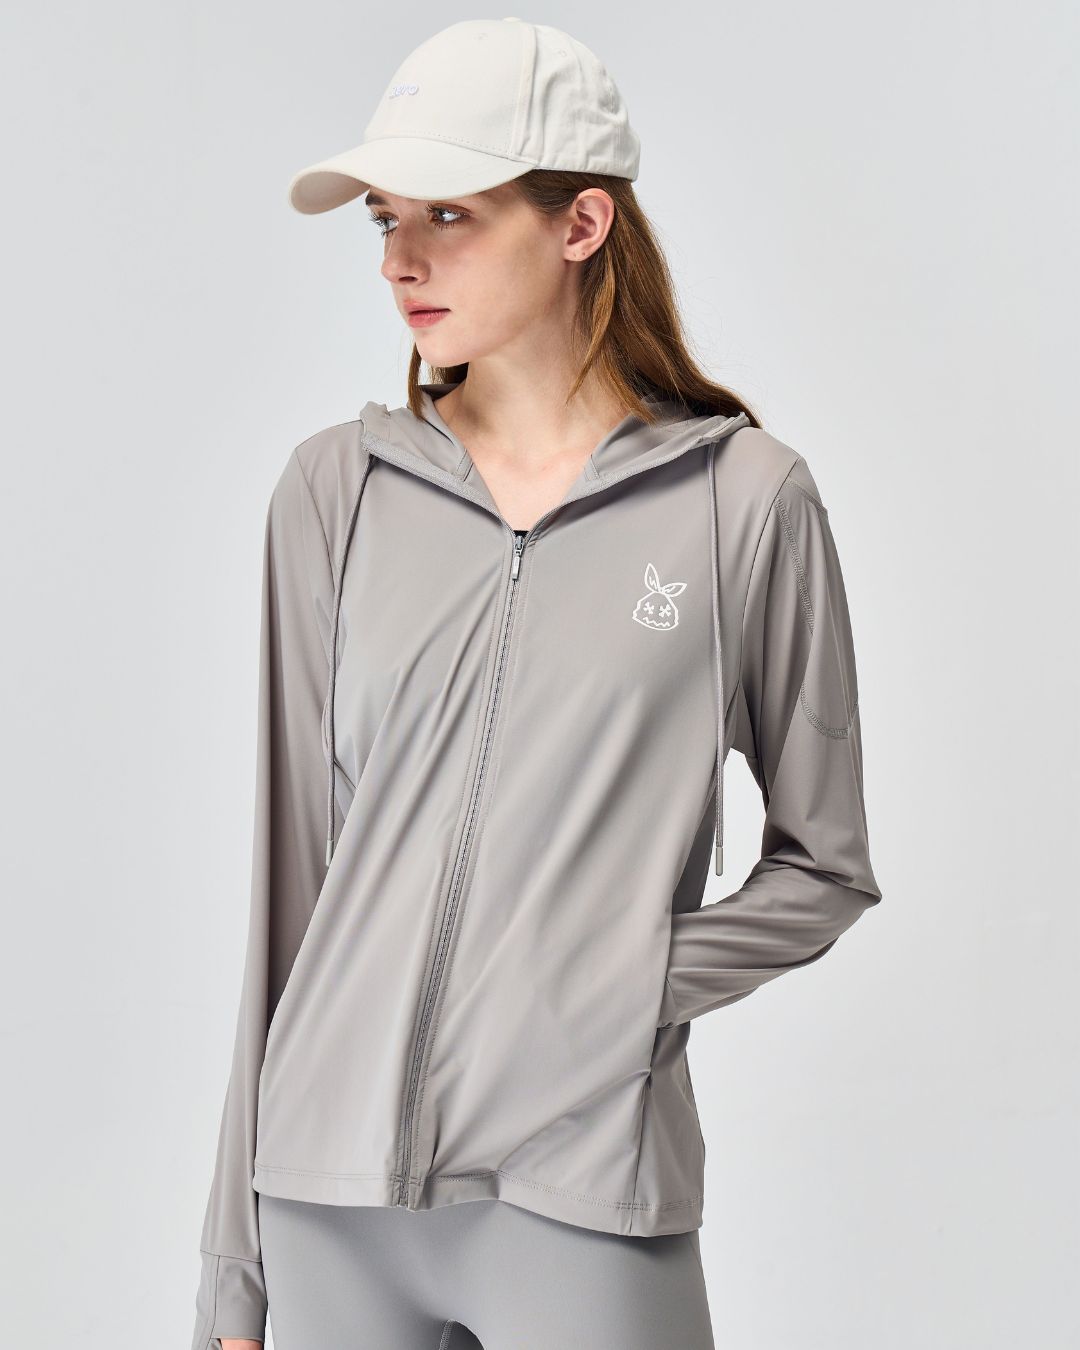 The "Bunny" UV Protection Lightweight Fullzip Layer